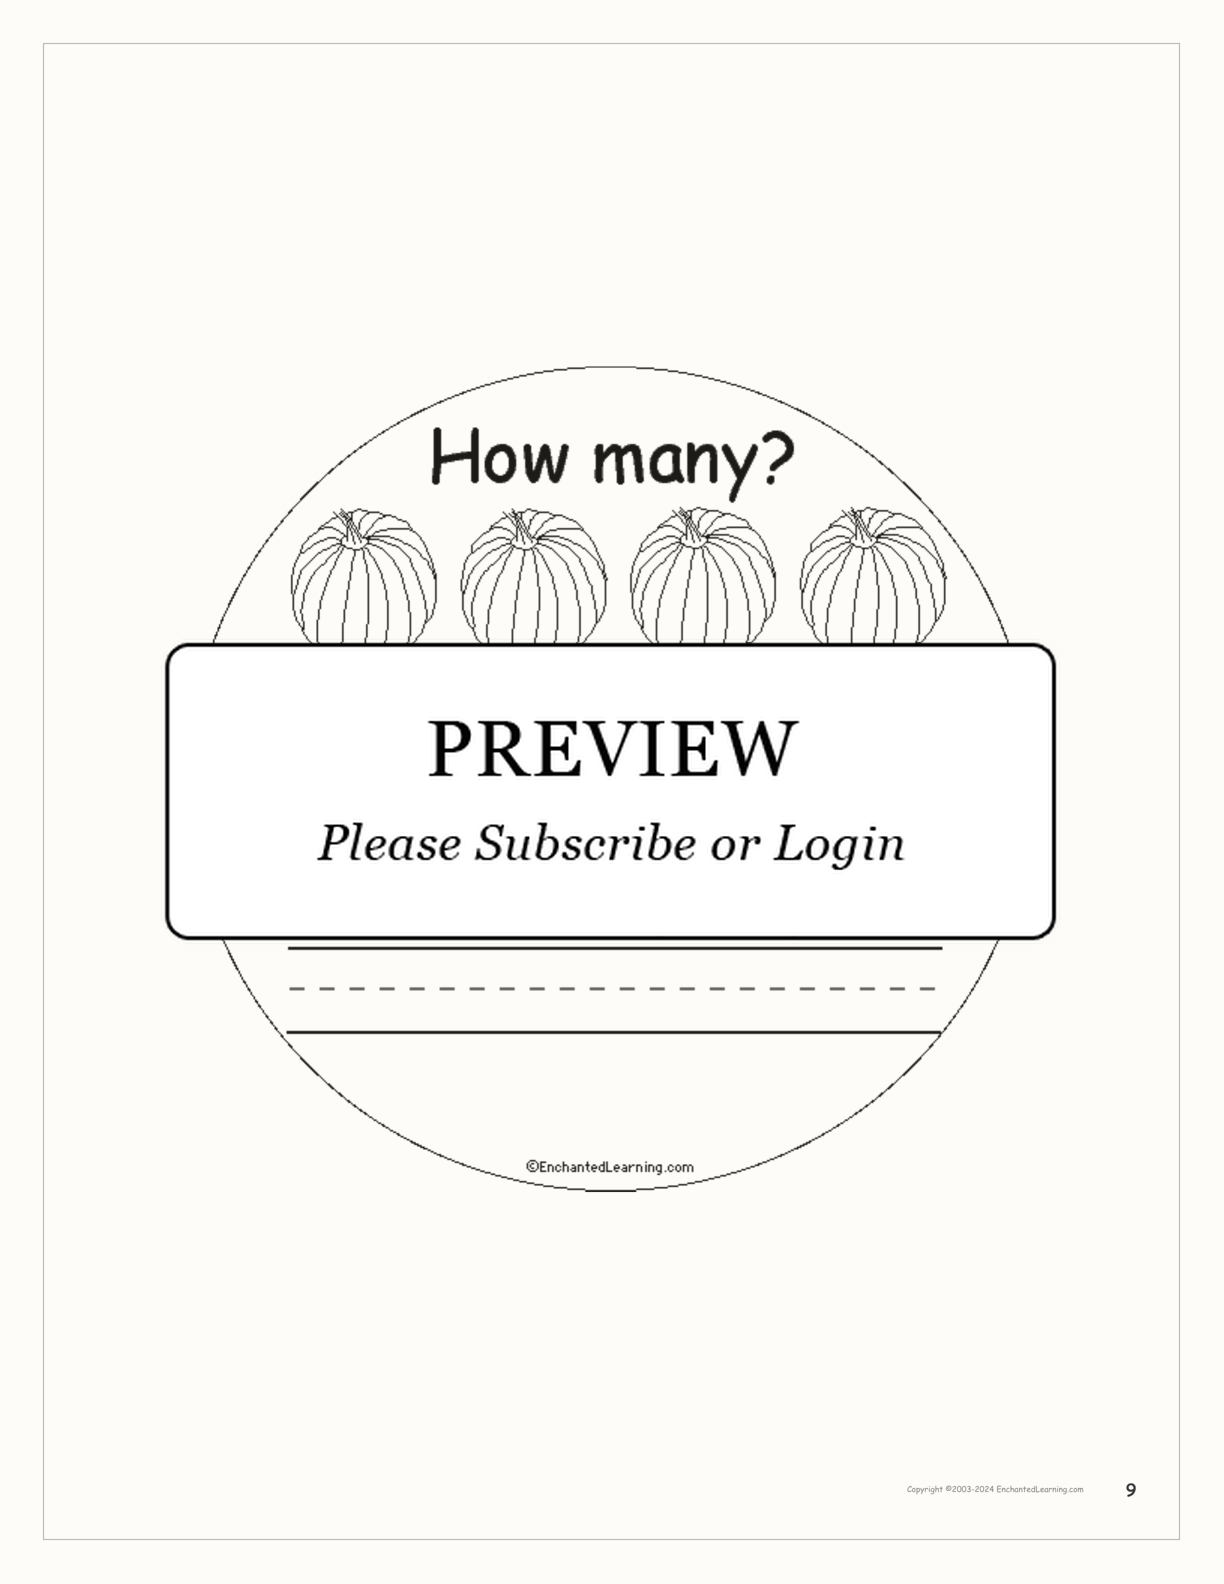 How Many Pumpkins? interactive printout page 9